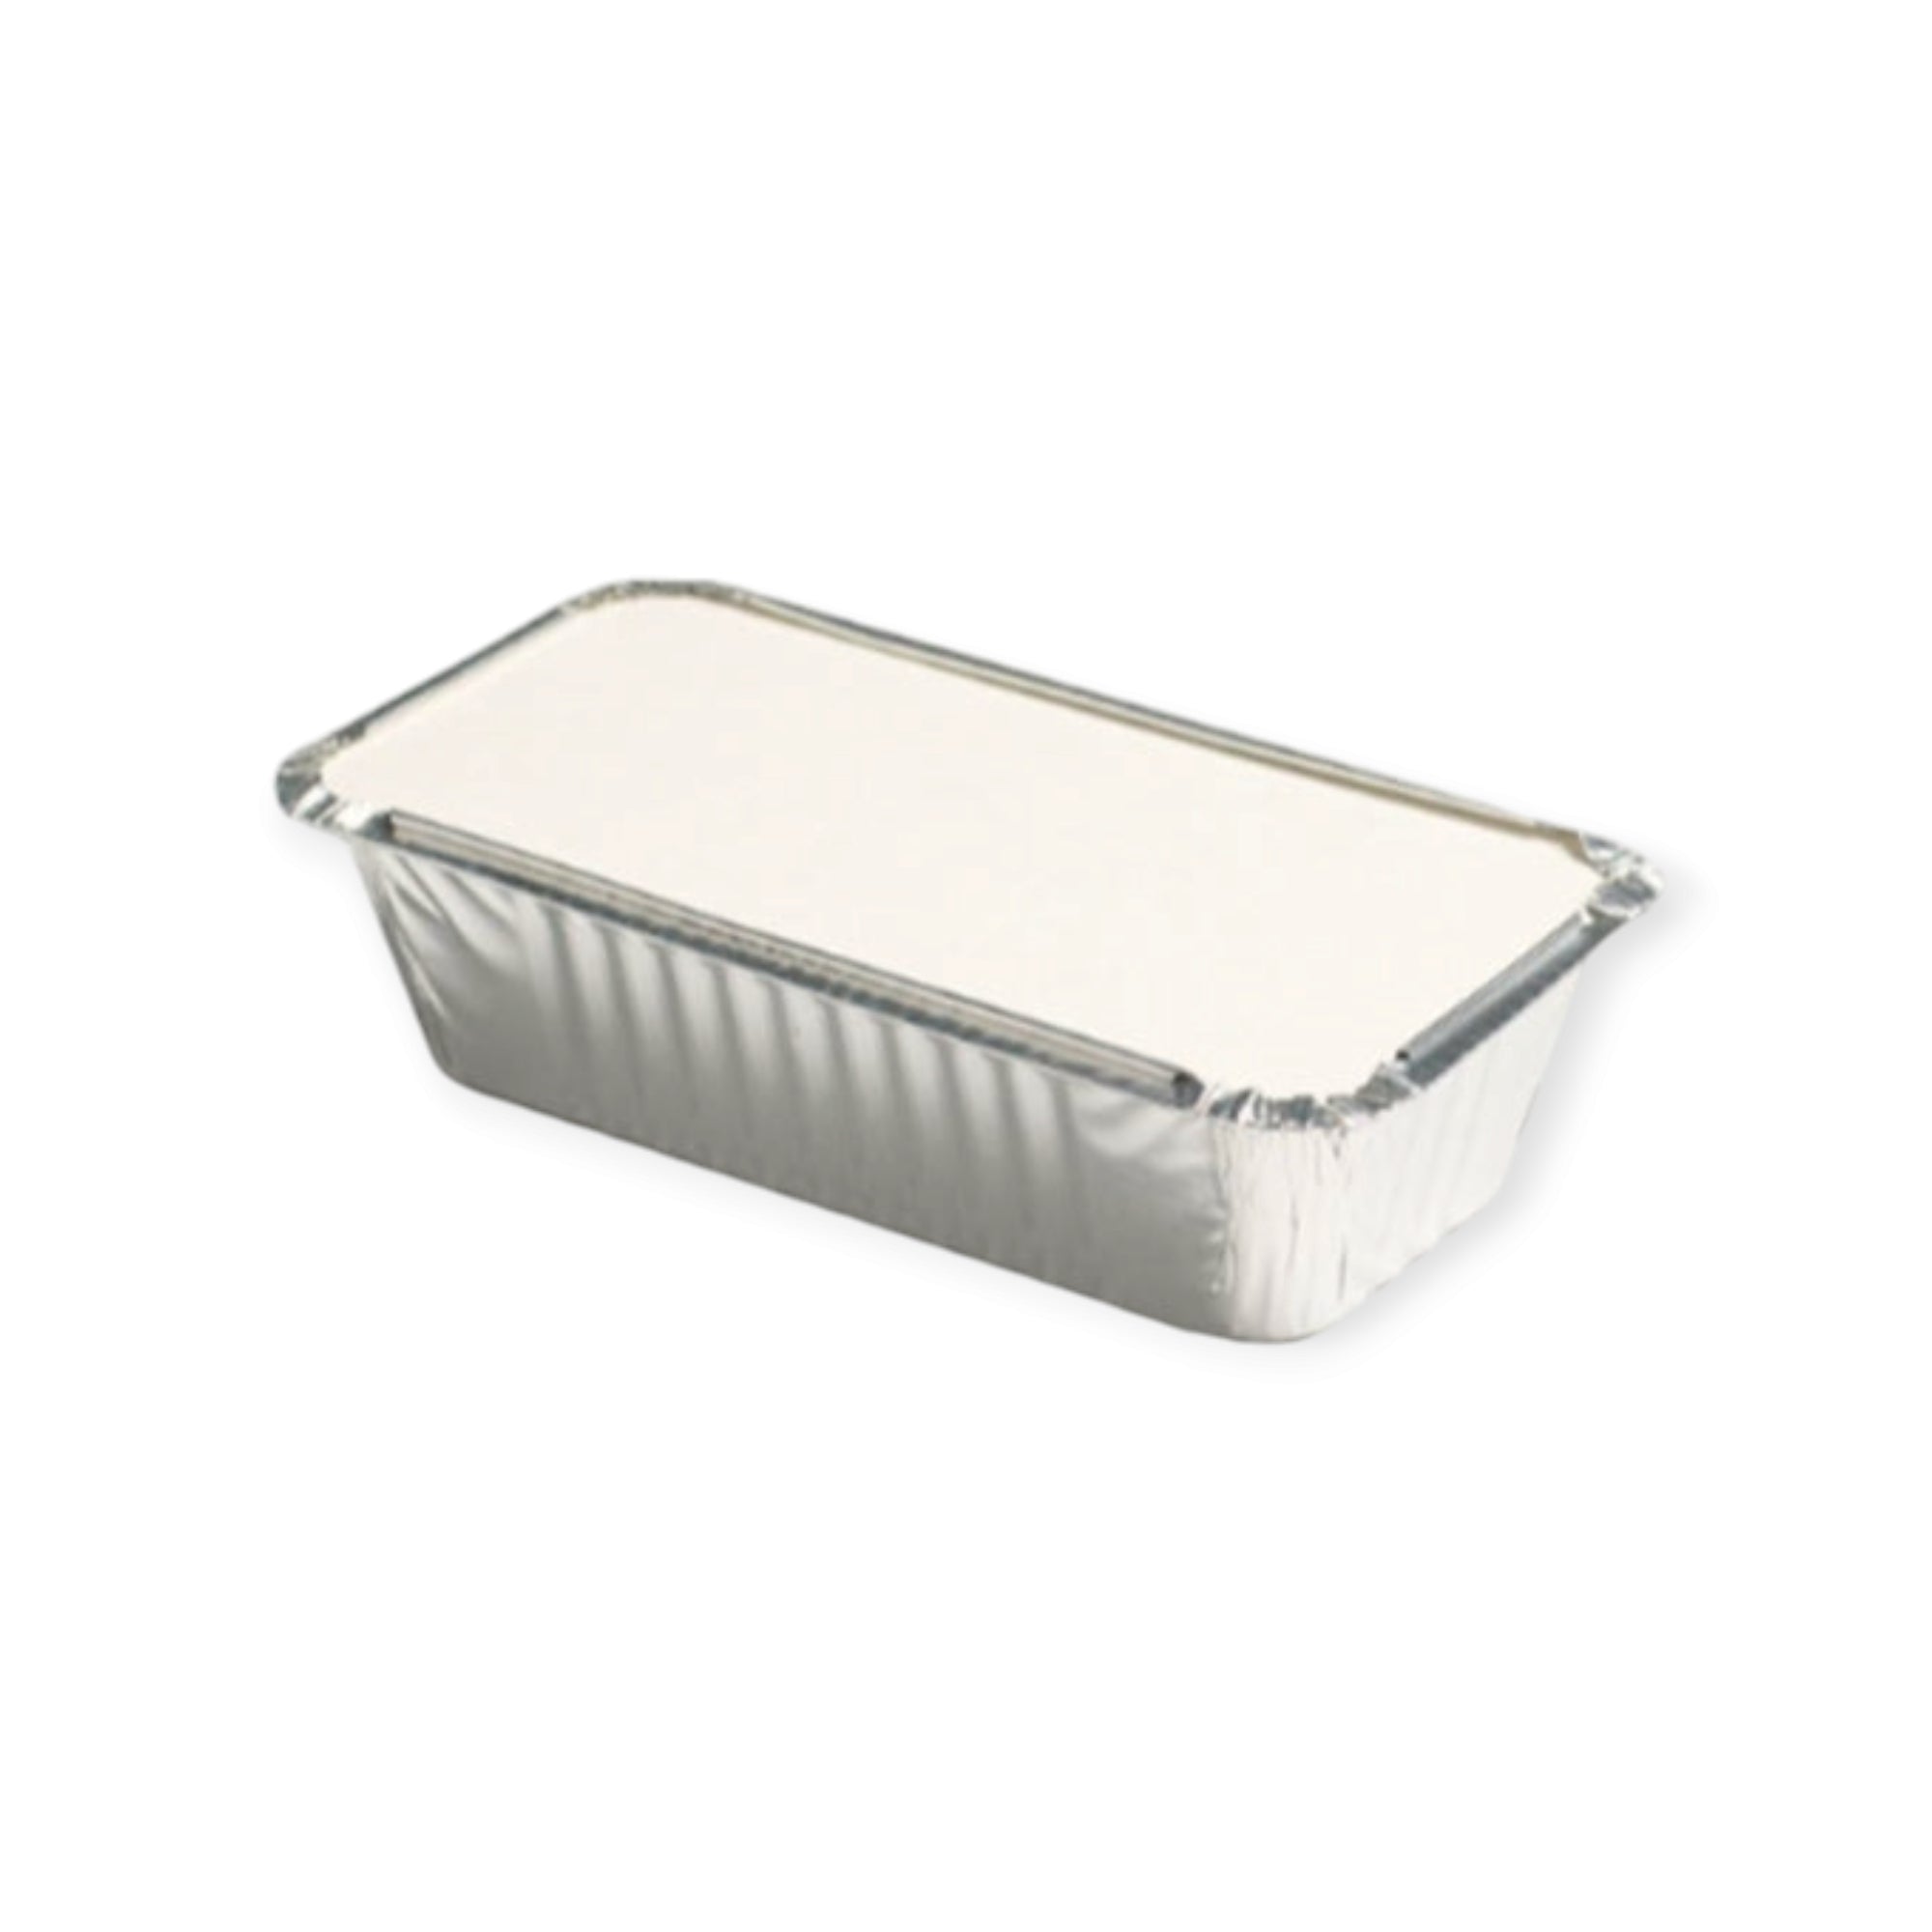 Aluminum Foil Takeaway Container Disposable with Cardboard Lid 4283P/B4283 1pc